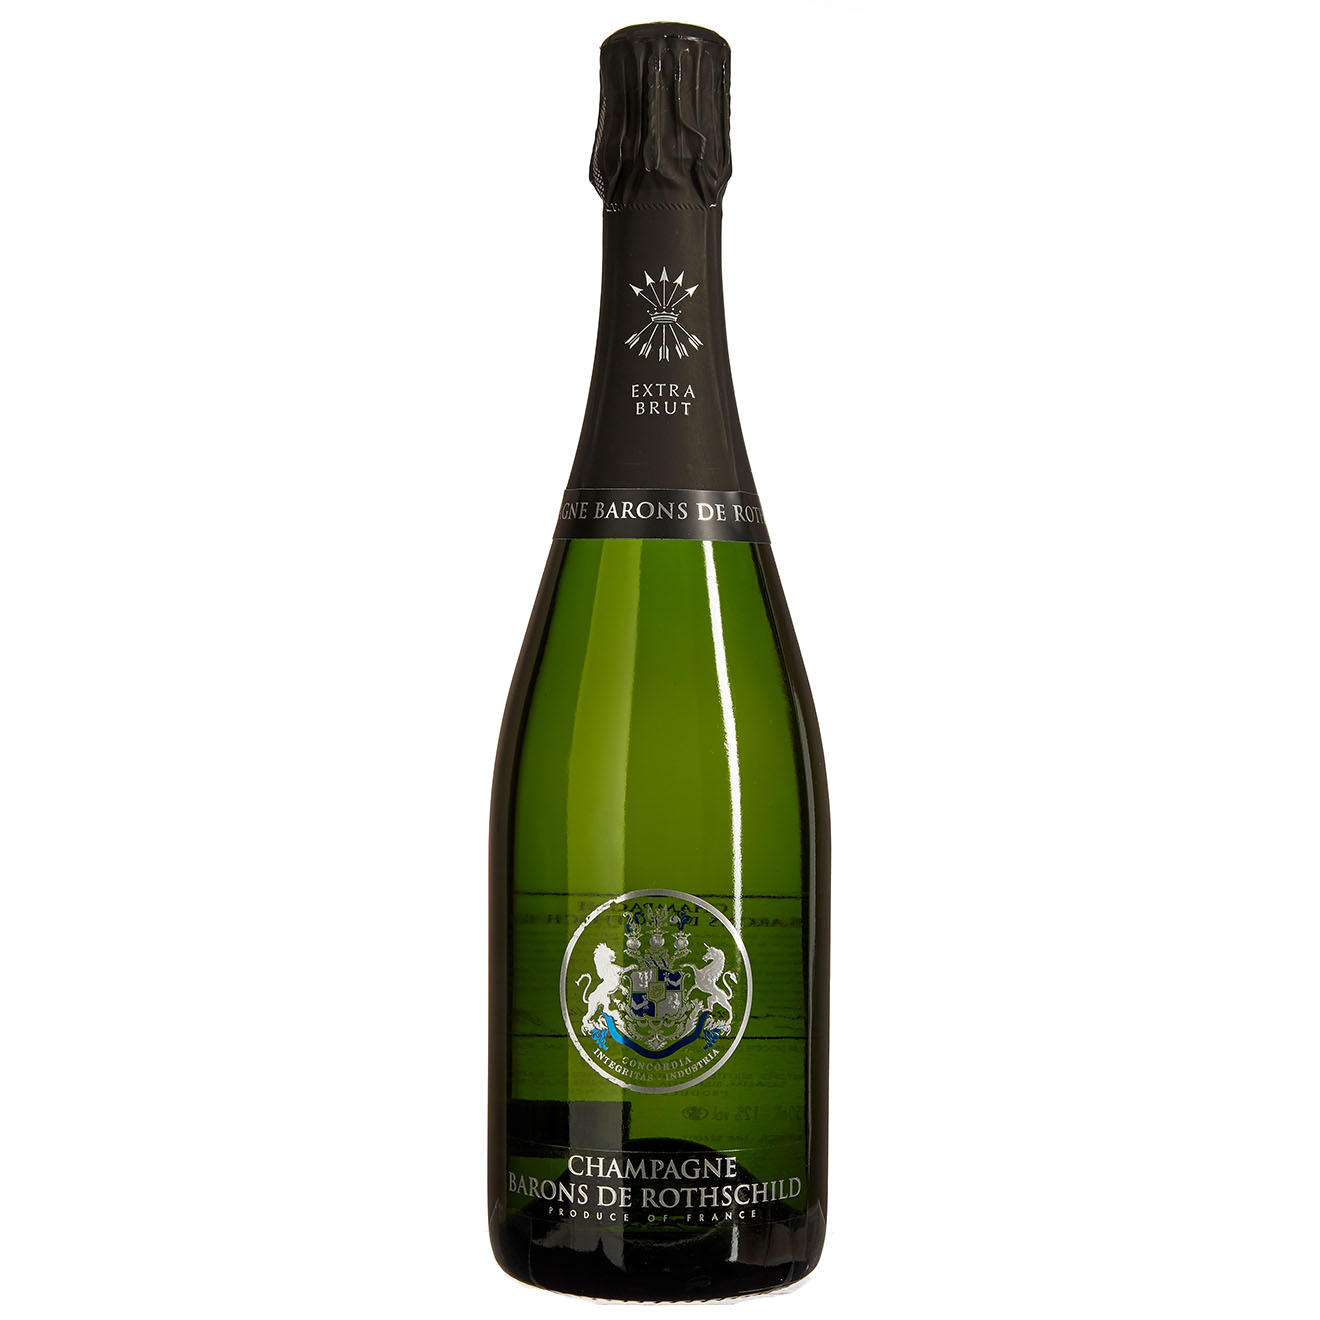 1 Champagne Extra Brut Barons de Rothschild 75cl